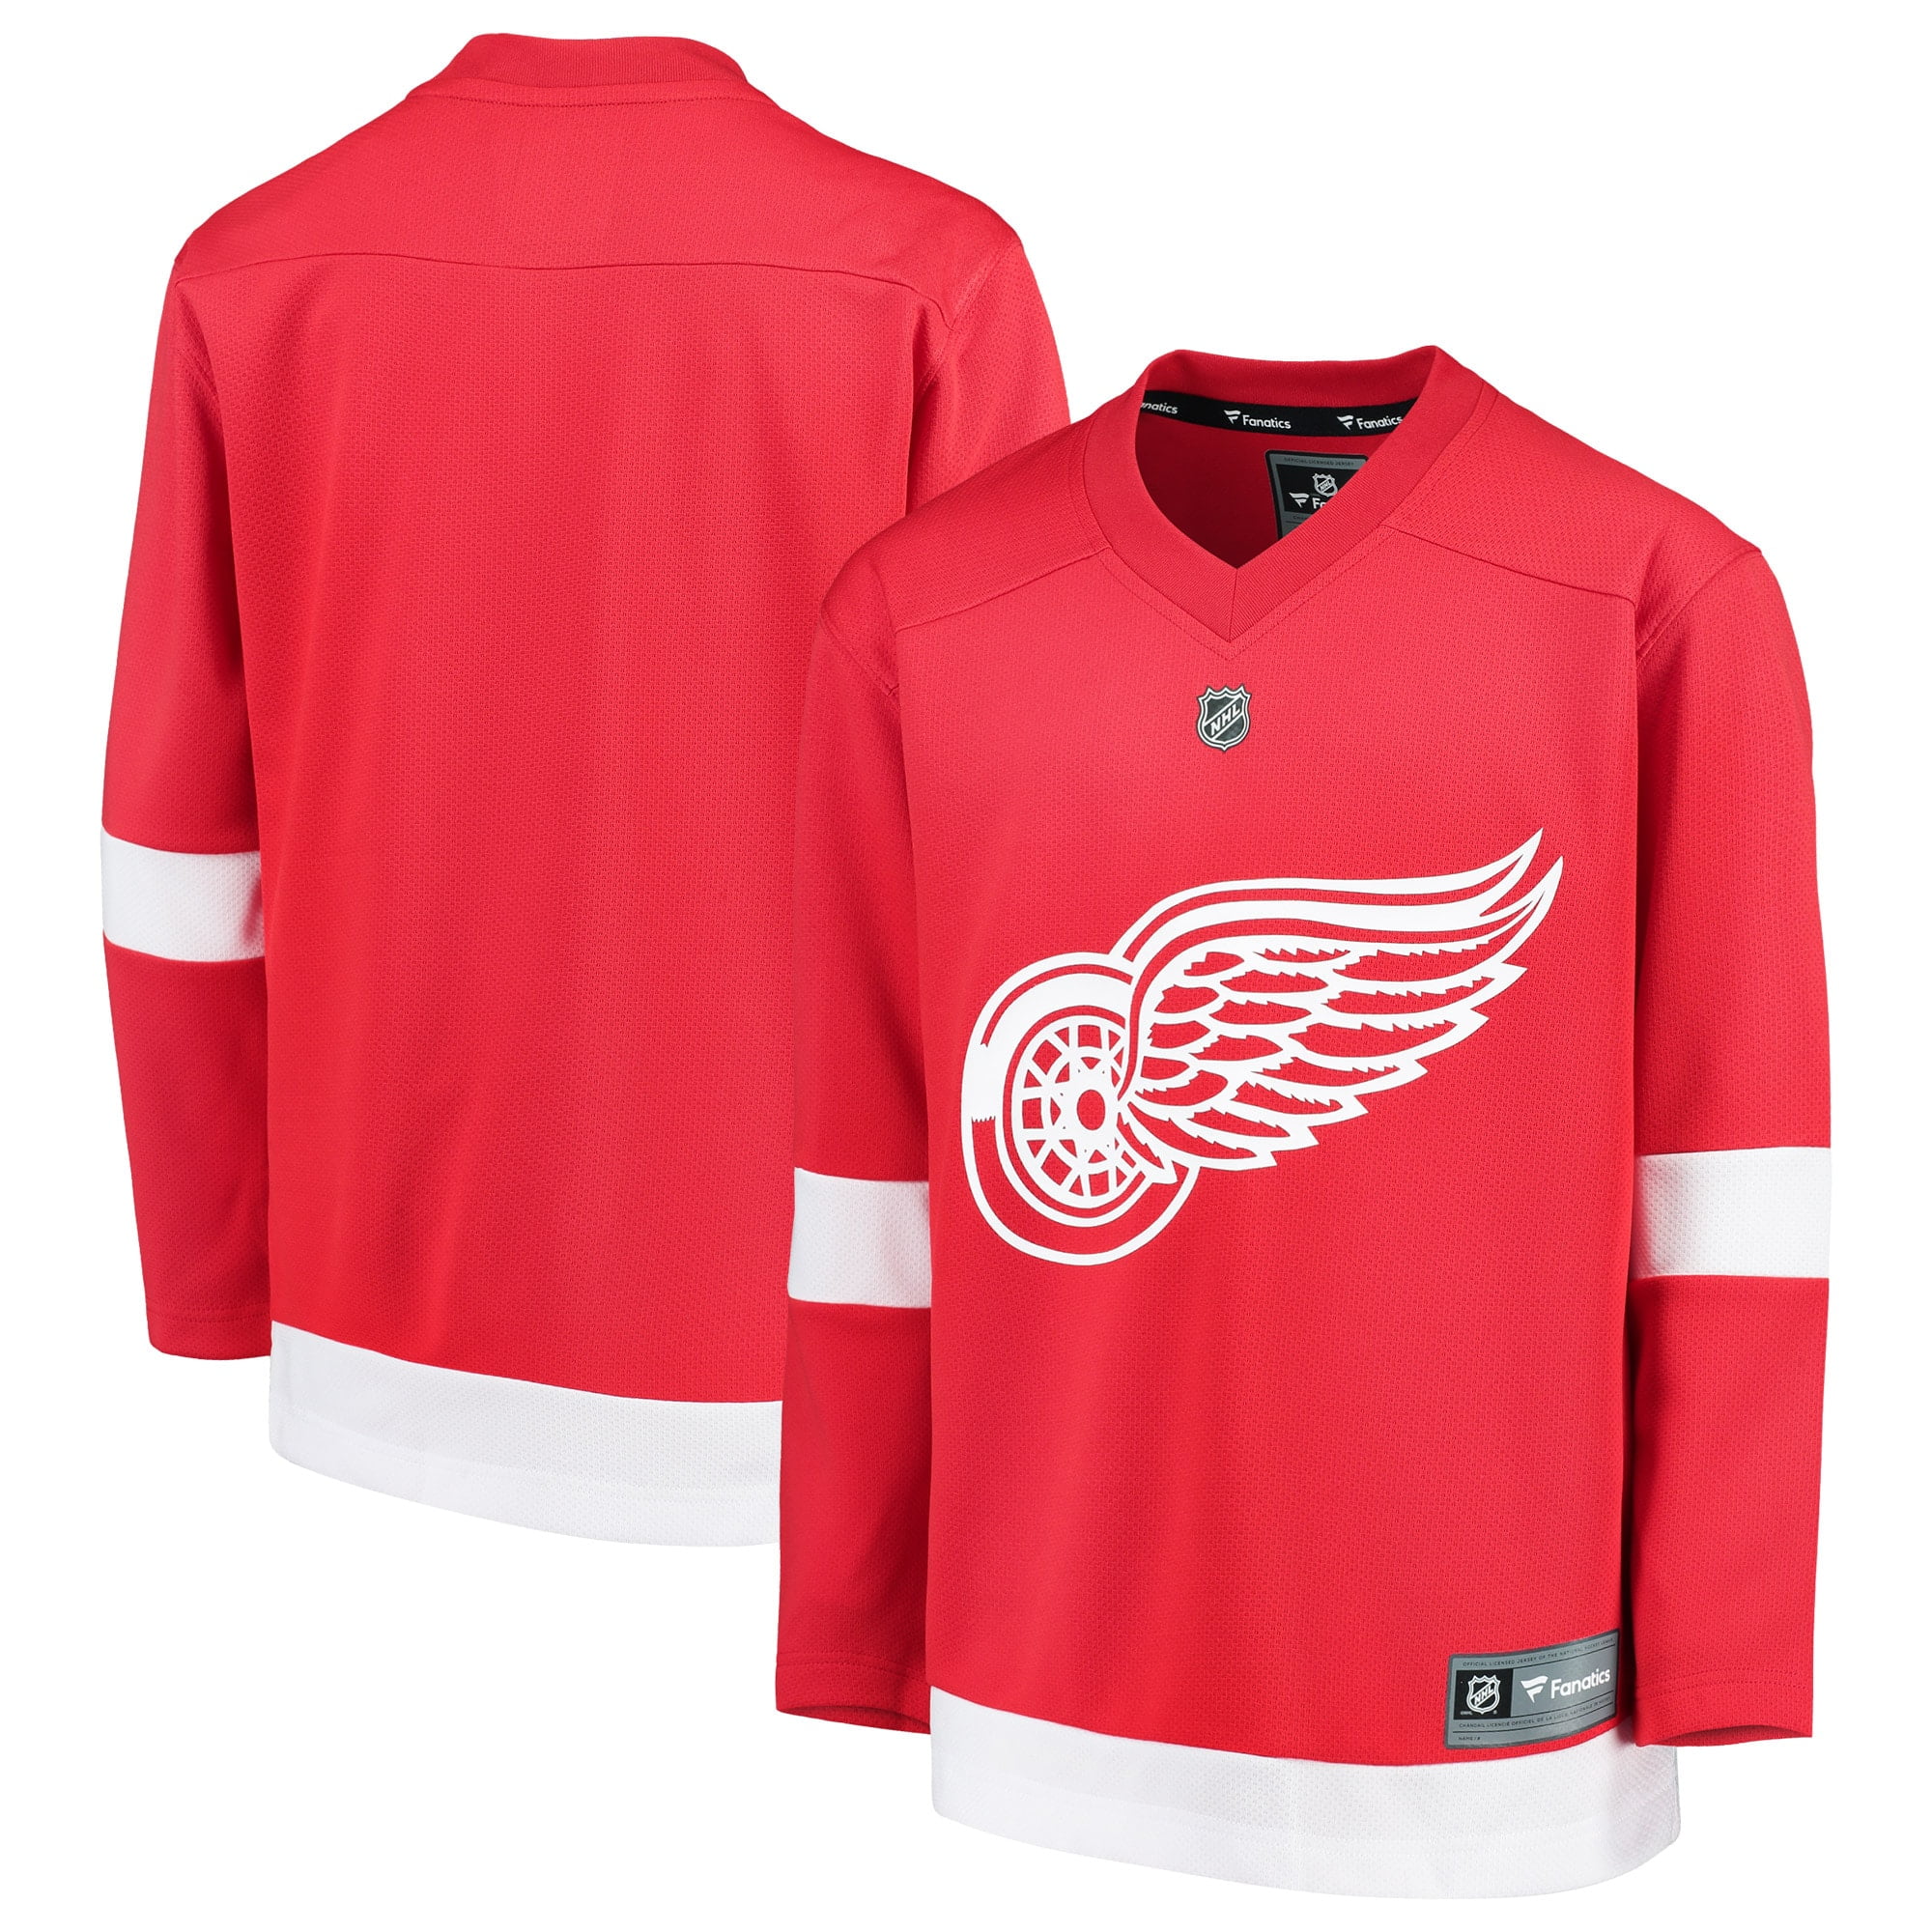 Detroit Red Wings Fanatics Branded Youth Home Replica Blank Jersey - Red